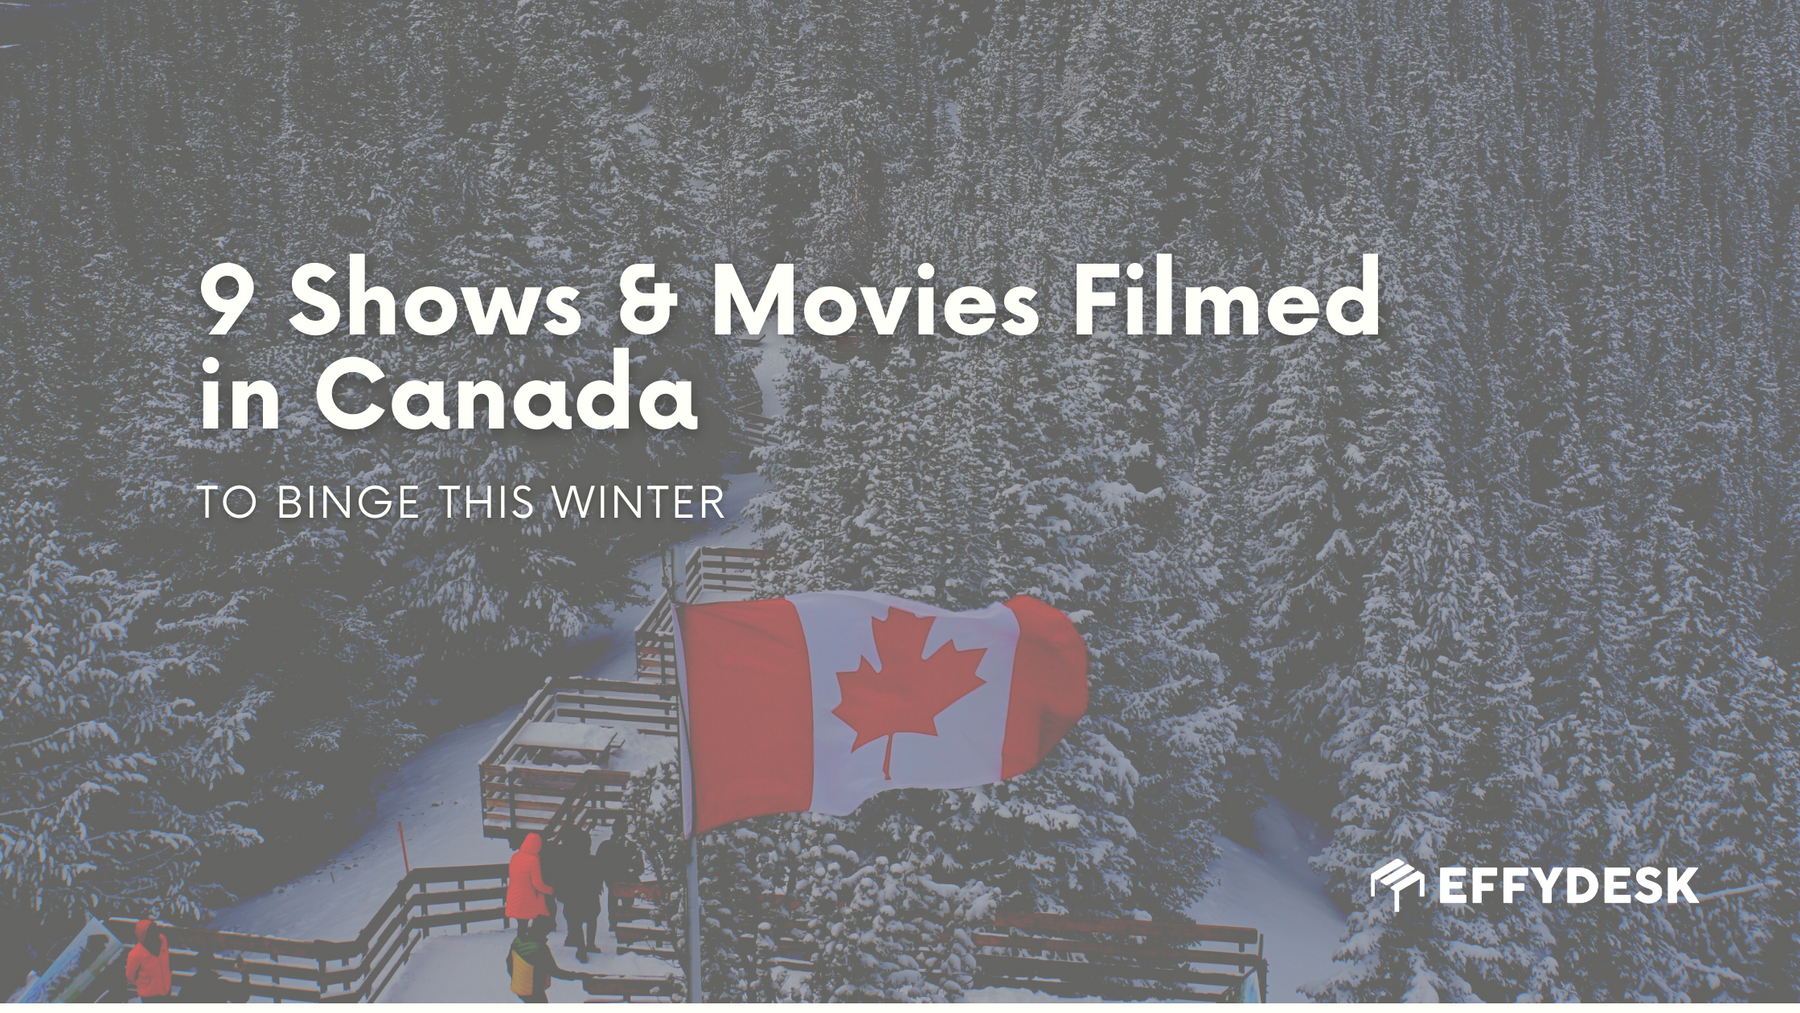 9 Shows & Movies Filmed in Canada to Binge This Winter - EFFYDESK Blog (Vancouver, B.C)